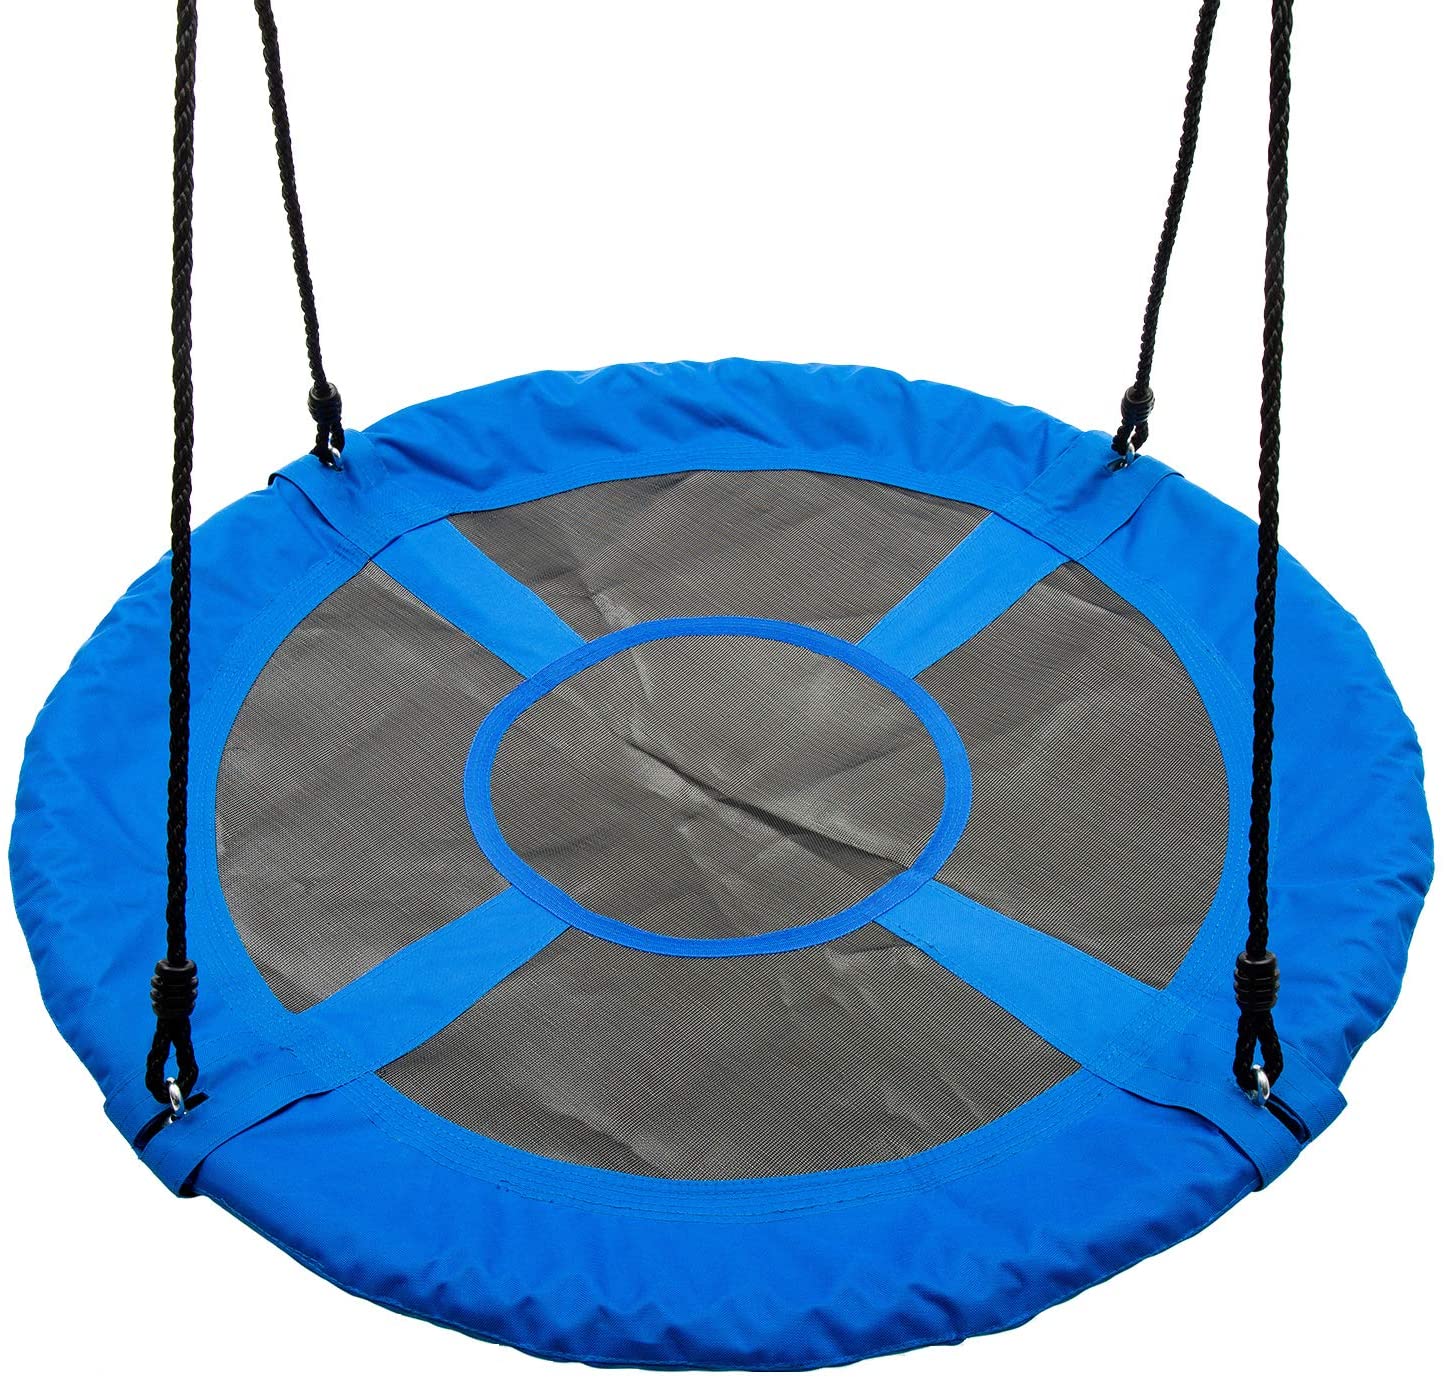 Walsport 40" Round Hanging Chair Swing Multi-seater Rainbow Platform Mat Indoor & Outdoor kids Flying Sky Swing Lounge Chair Park, Blue - image 2 of 14